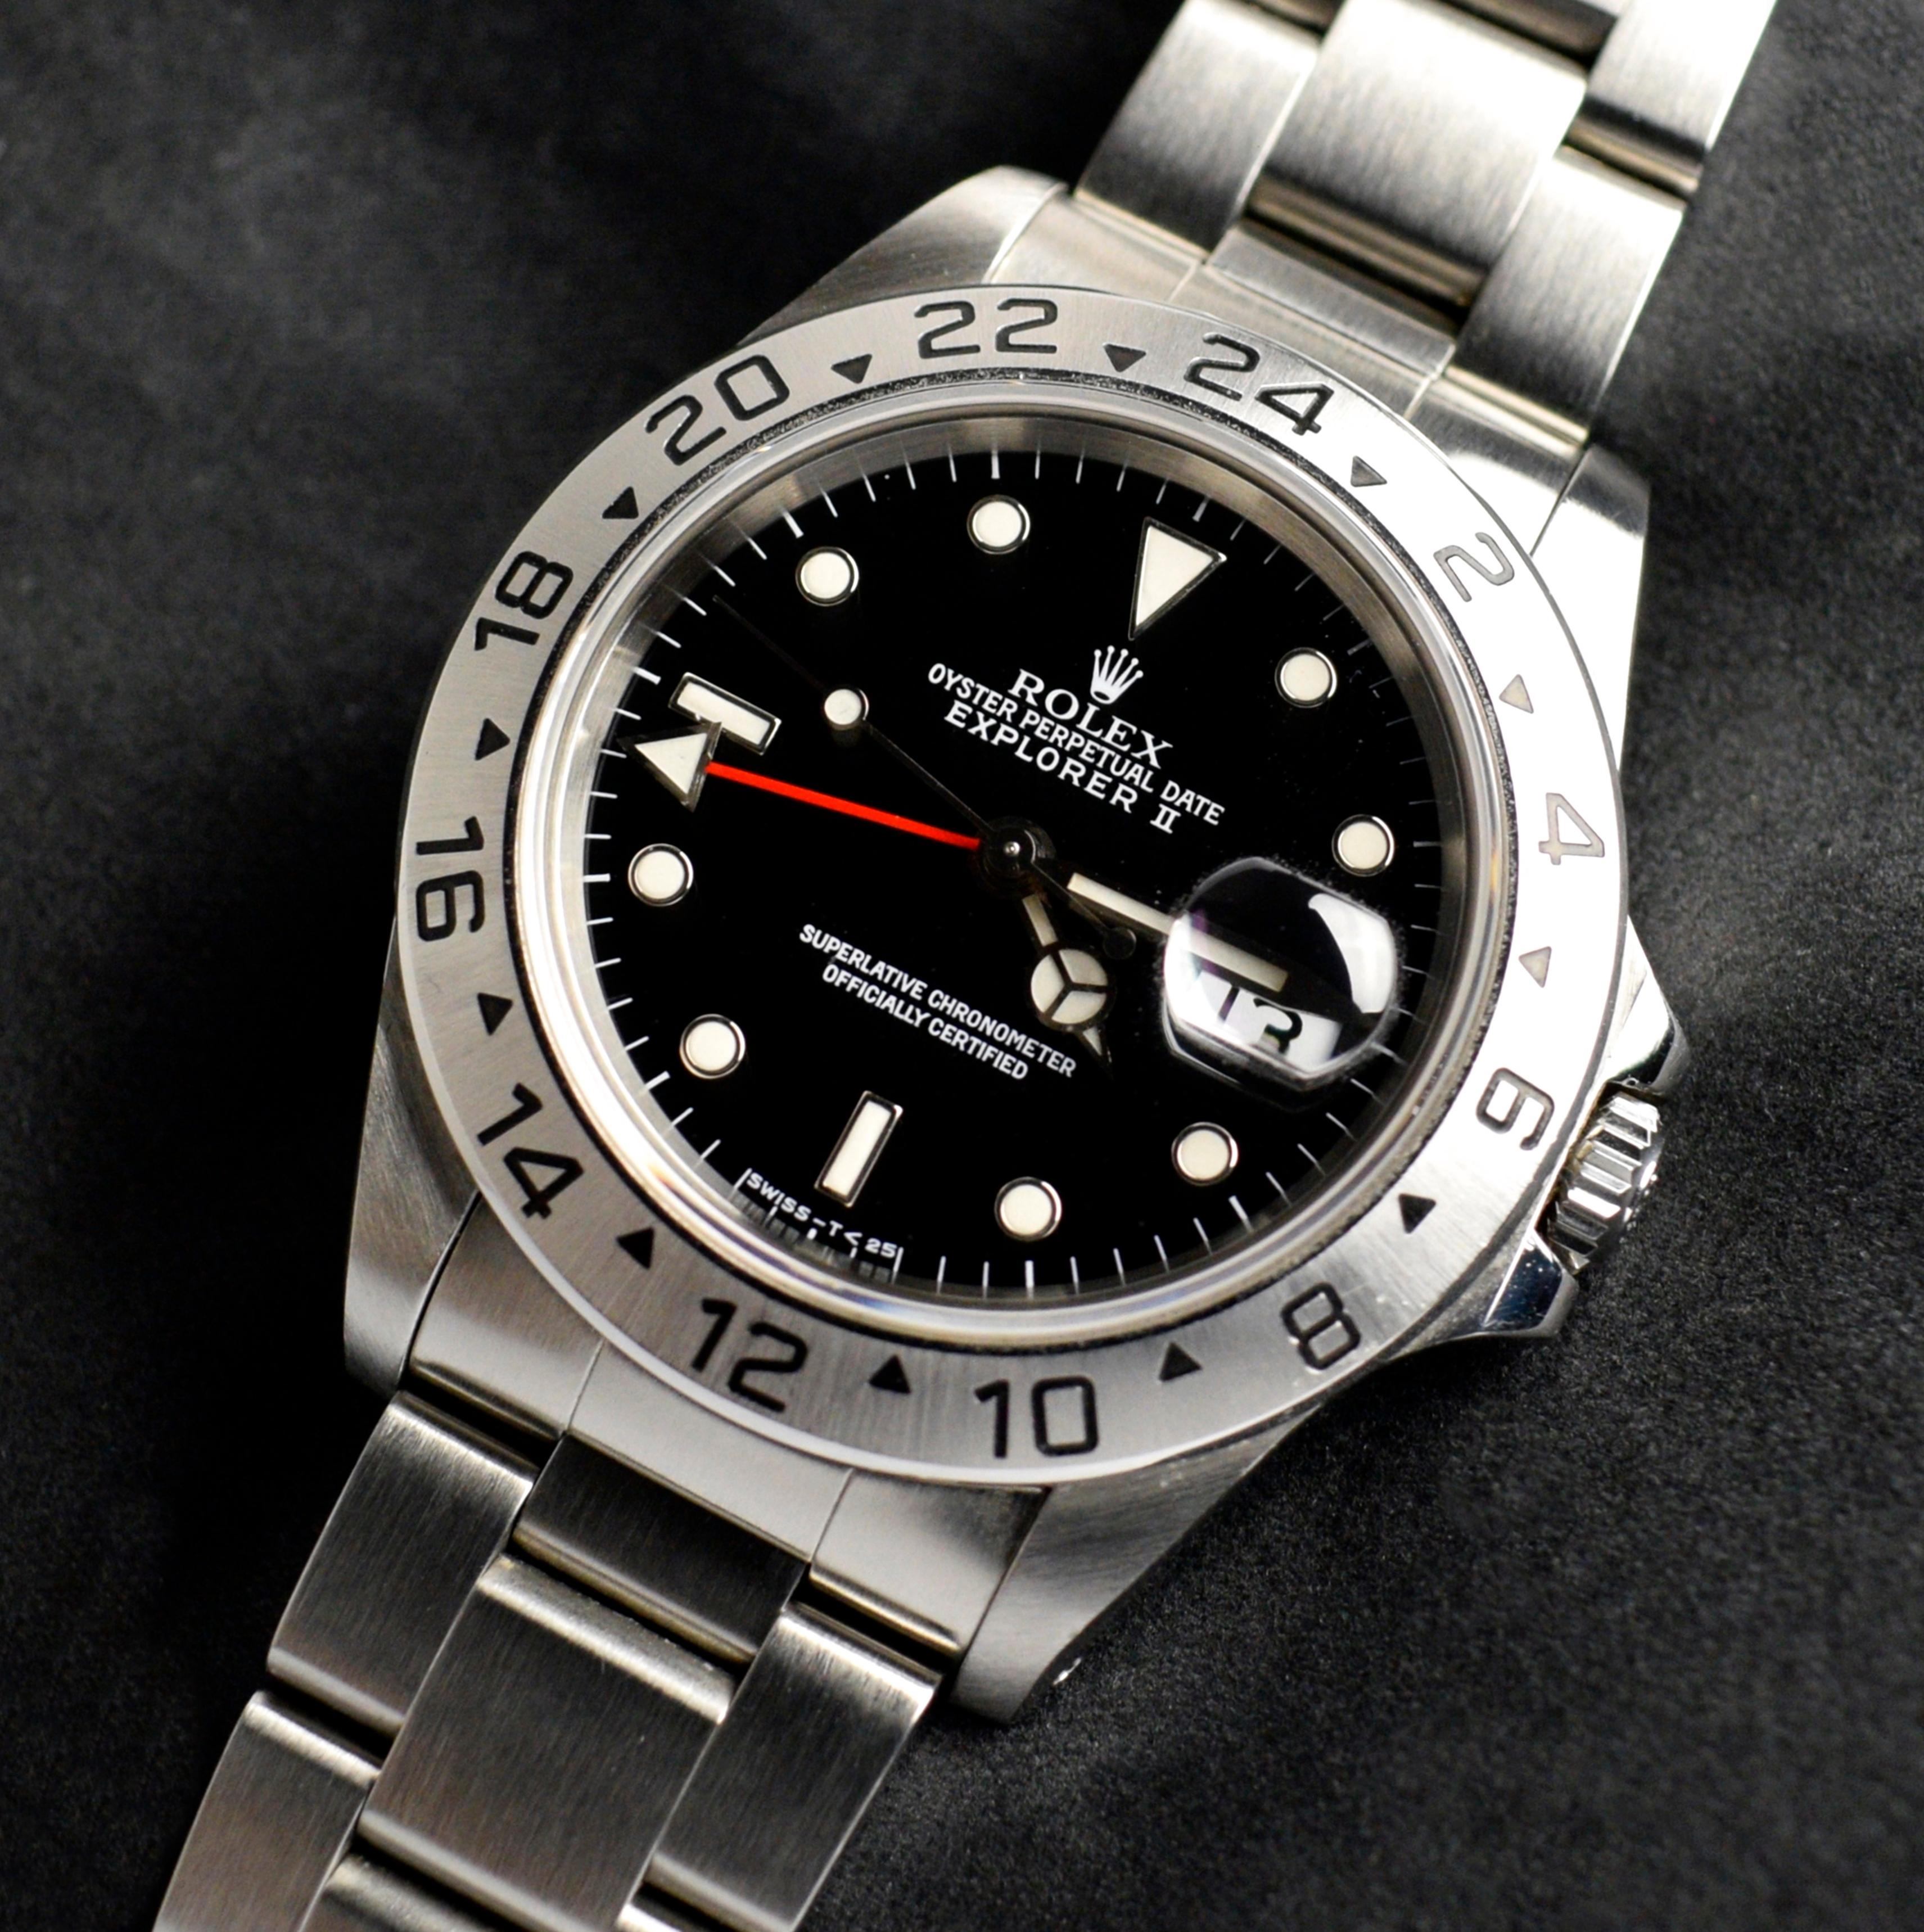 Brand: Rolex
Model: 16570
Year: 1993
Serial number: S9xxxxx

Reference: C03462

Case: Show sign of wear w/ slight polishing from previous; inner case back stamped 16570

Dial: Excellent Condition Tritium Black Dial 

Bracelet: 78360 Oyster Bracelet